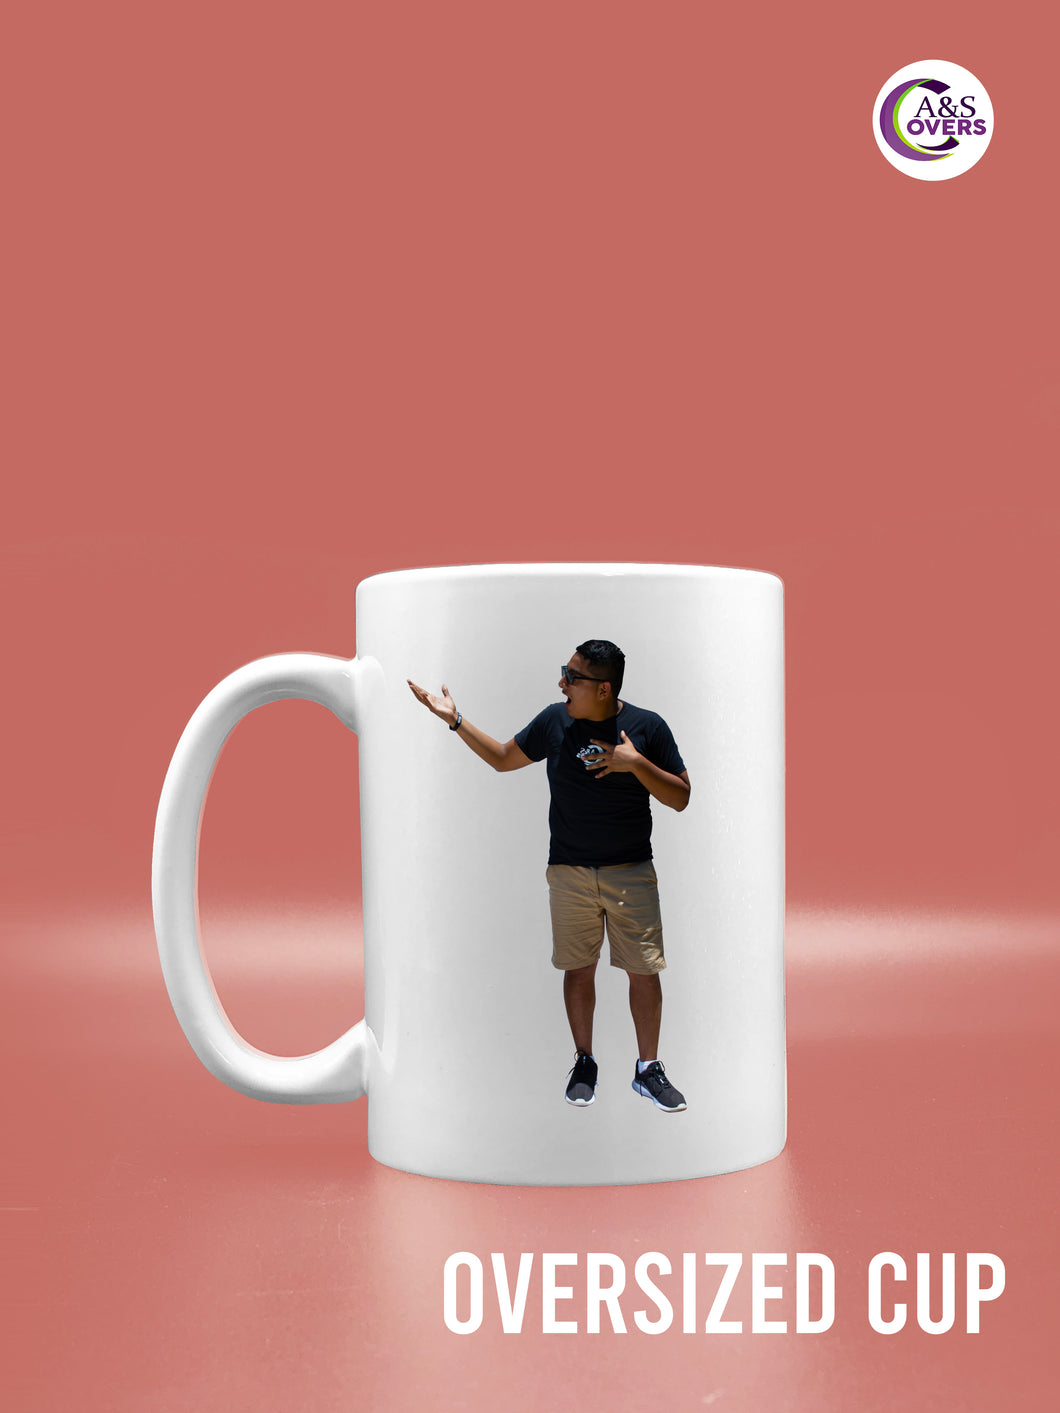 Custom Oversized Cup - A&S Covers